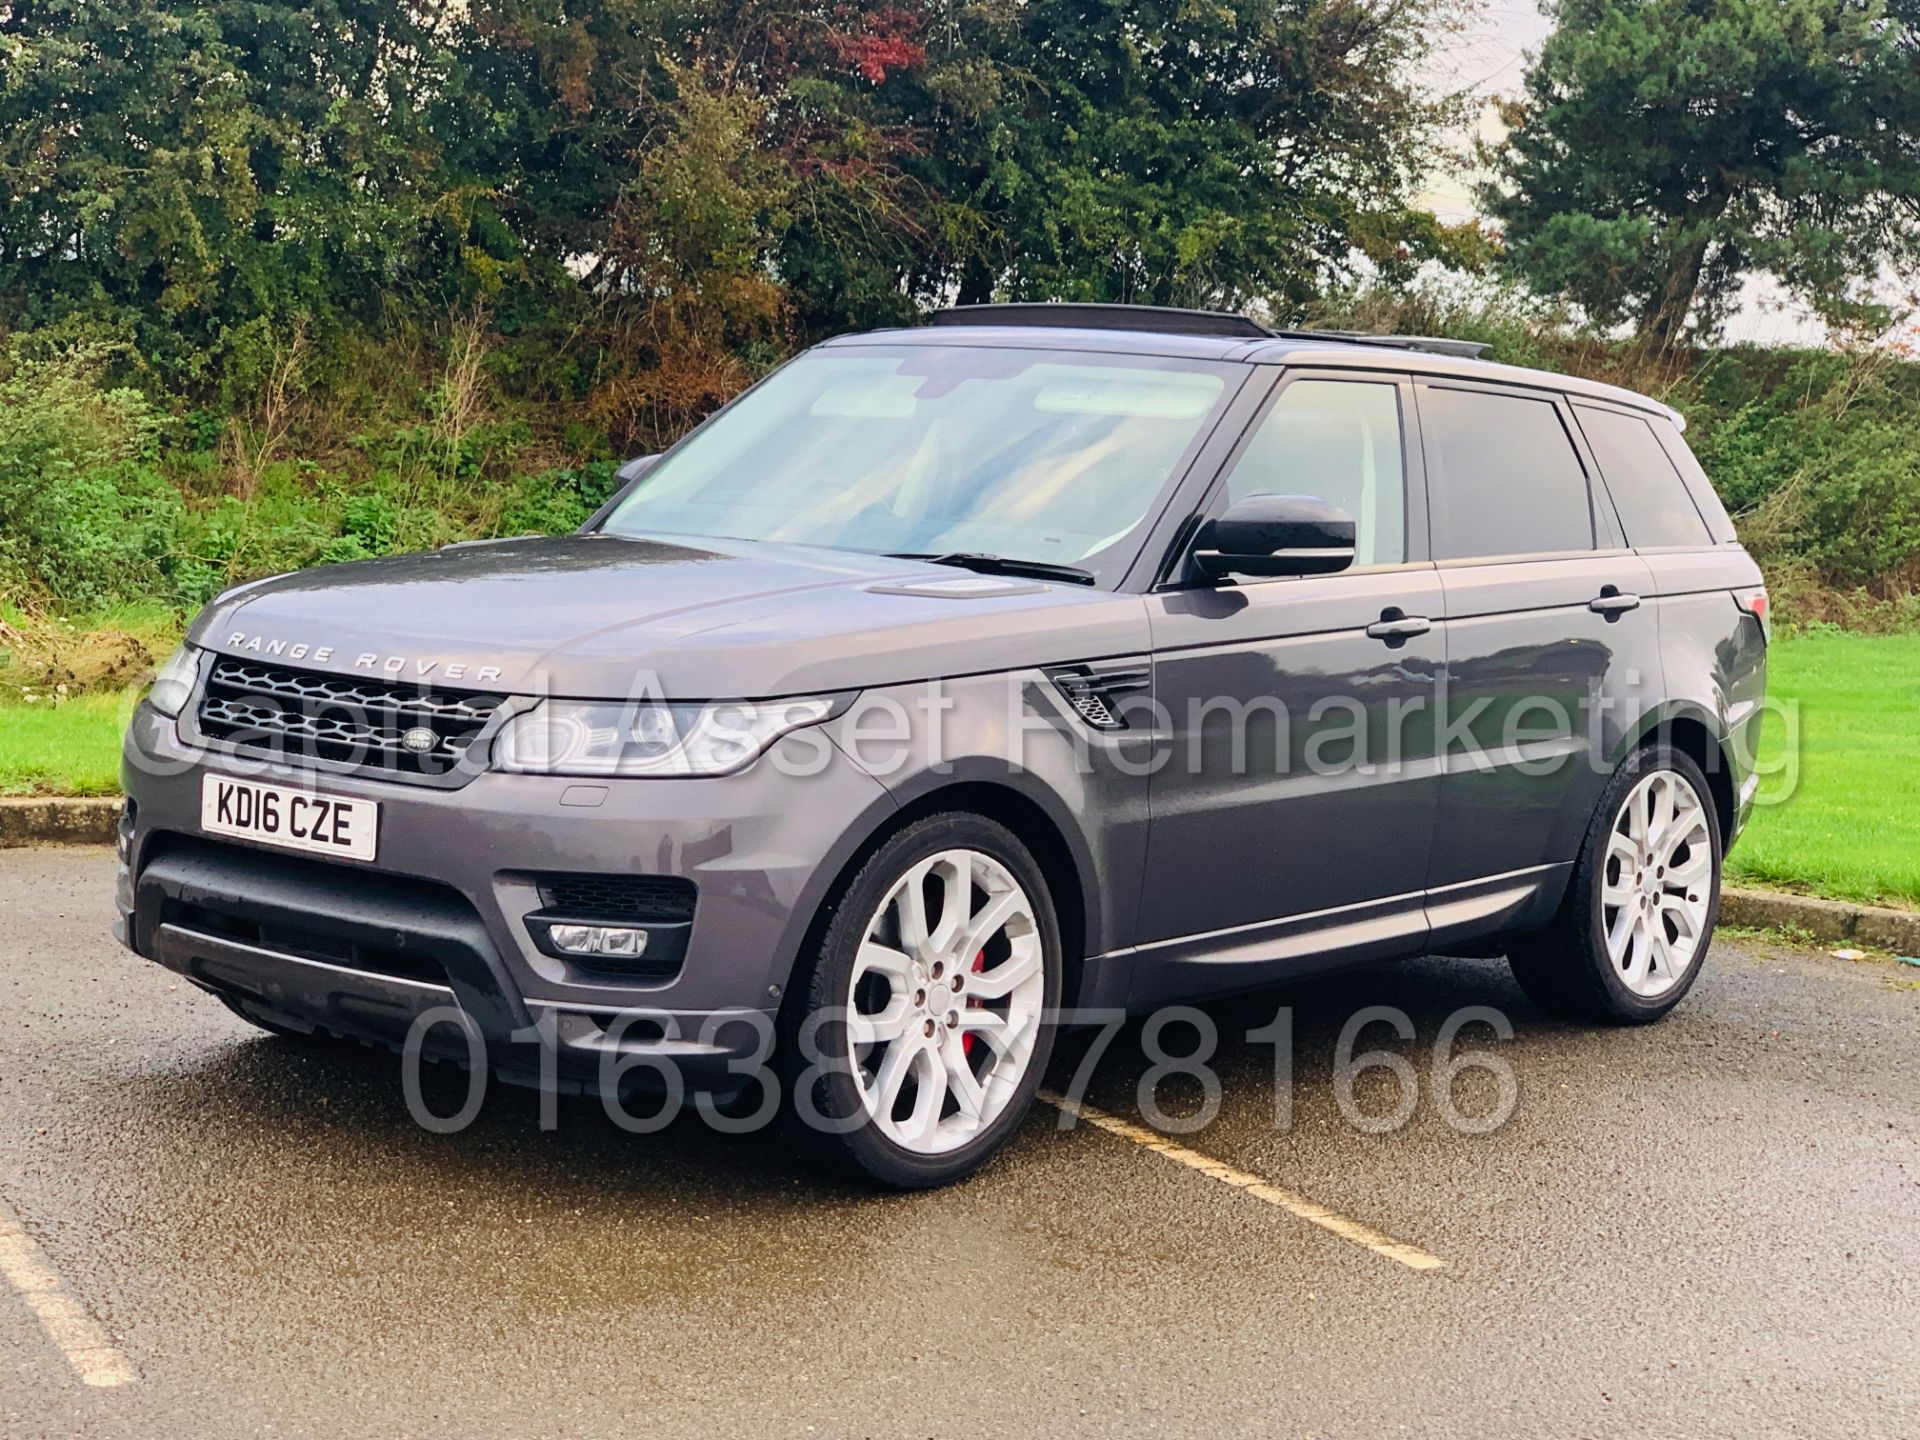 (ON SALE) RANGE ROVER SPORT 3.0 SDV6 *AUTOBIOGRAPHY DYNAMIC*AUTO *FULLY LOADED* MONSTER SPEC *16 REG - Image 3 of 70